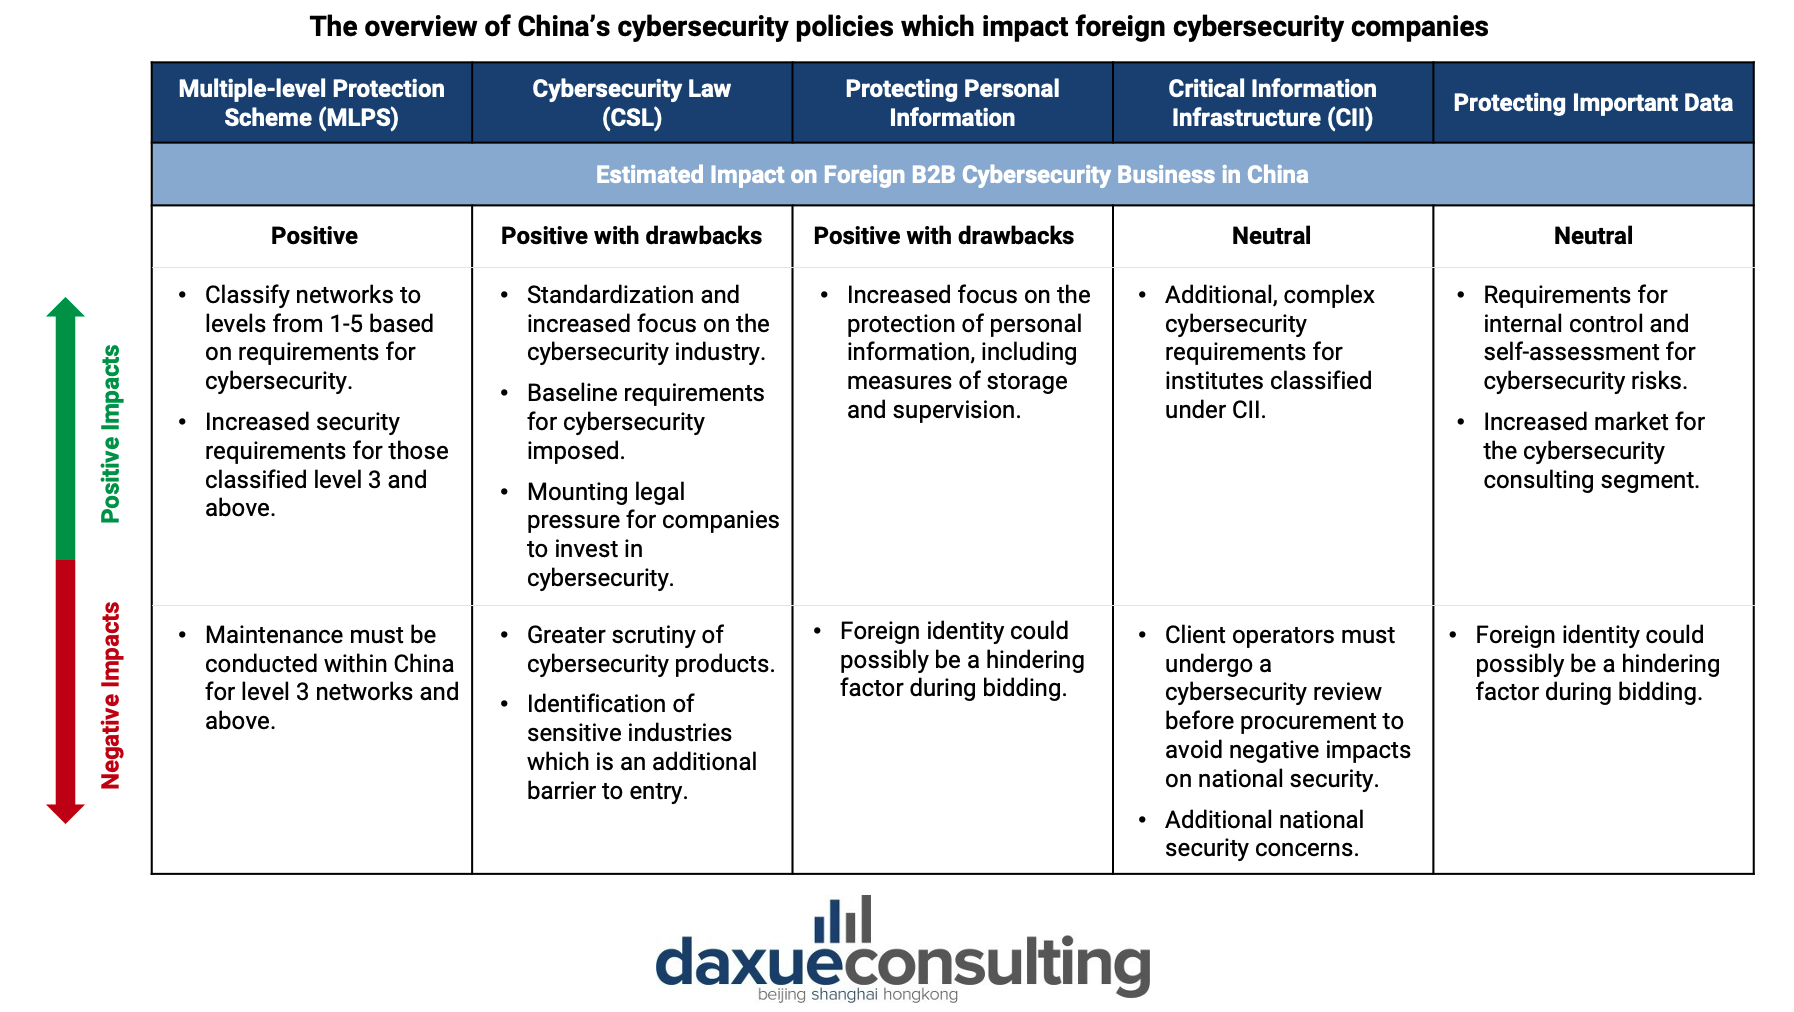 China’s cybersecurity industry